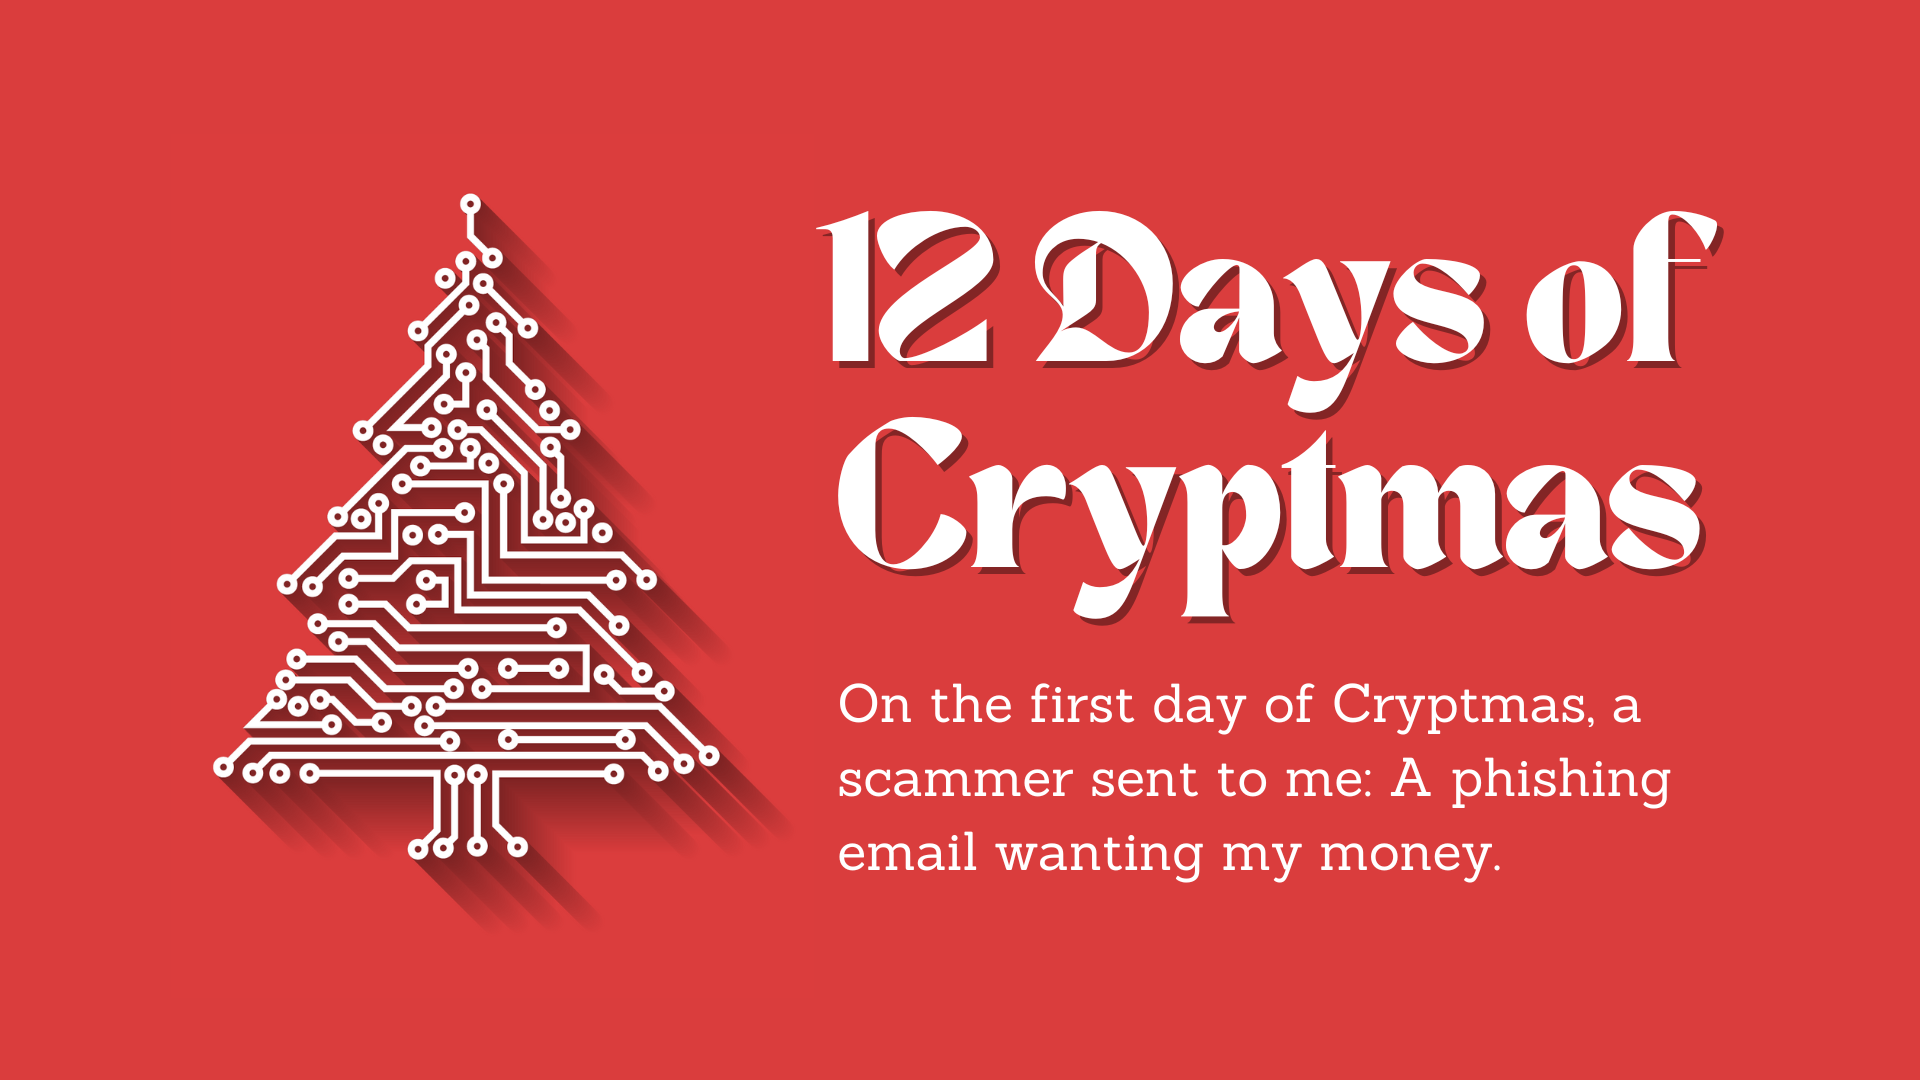 On the first day of Cryptmas, a scammer sent to me: A phishing email wanting my money.